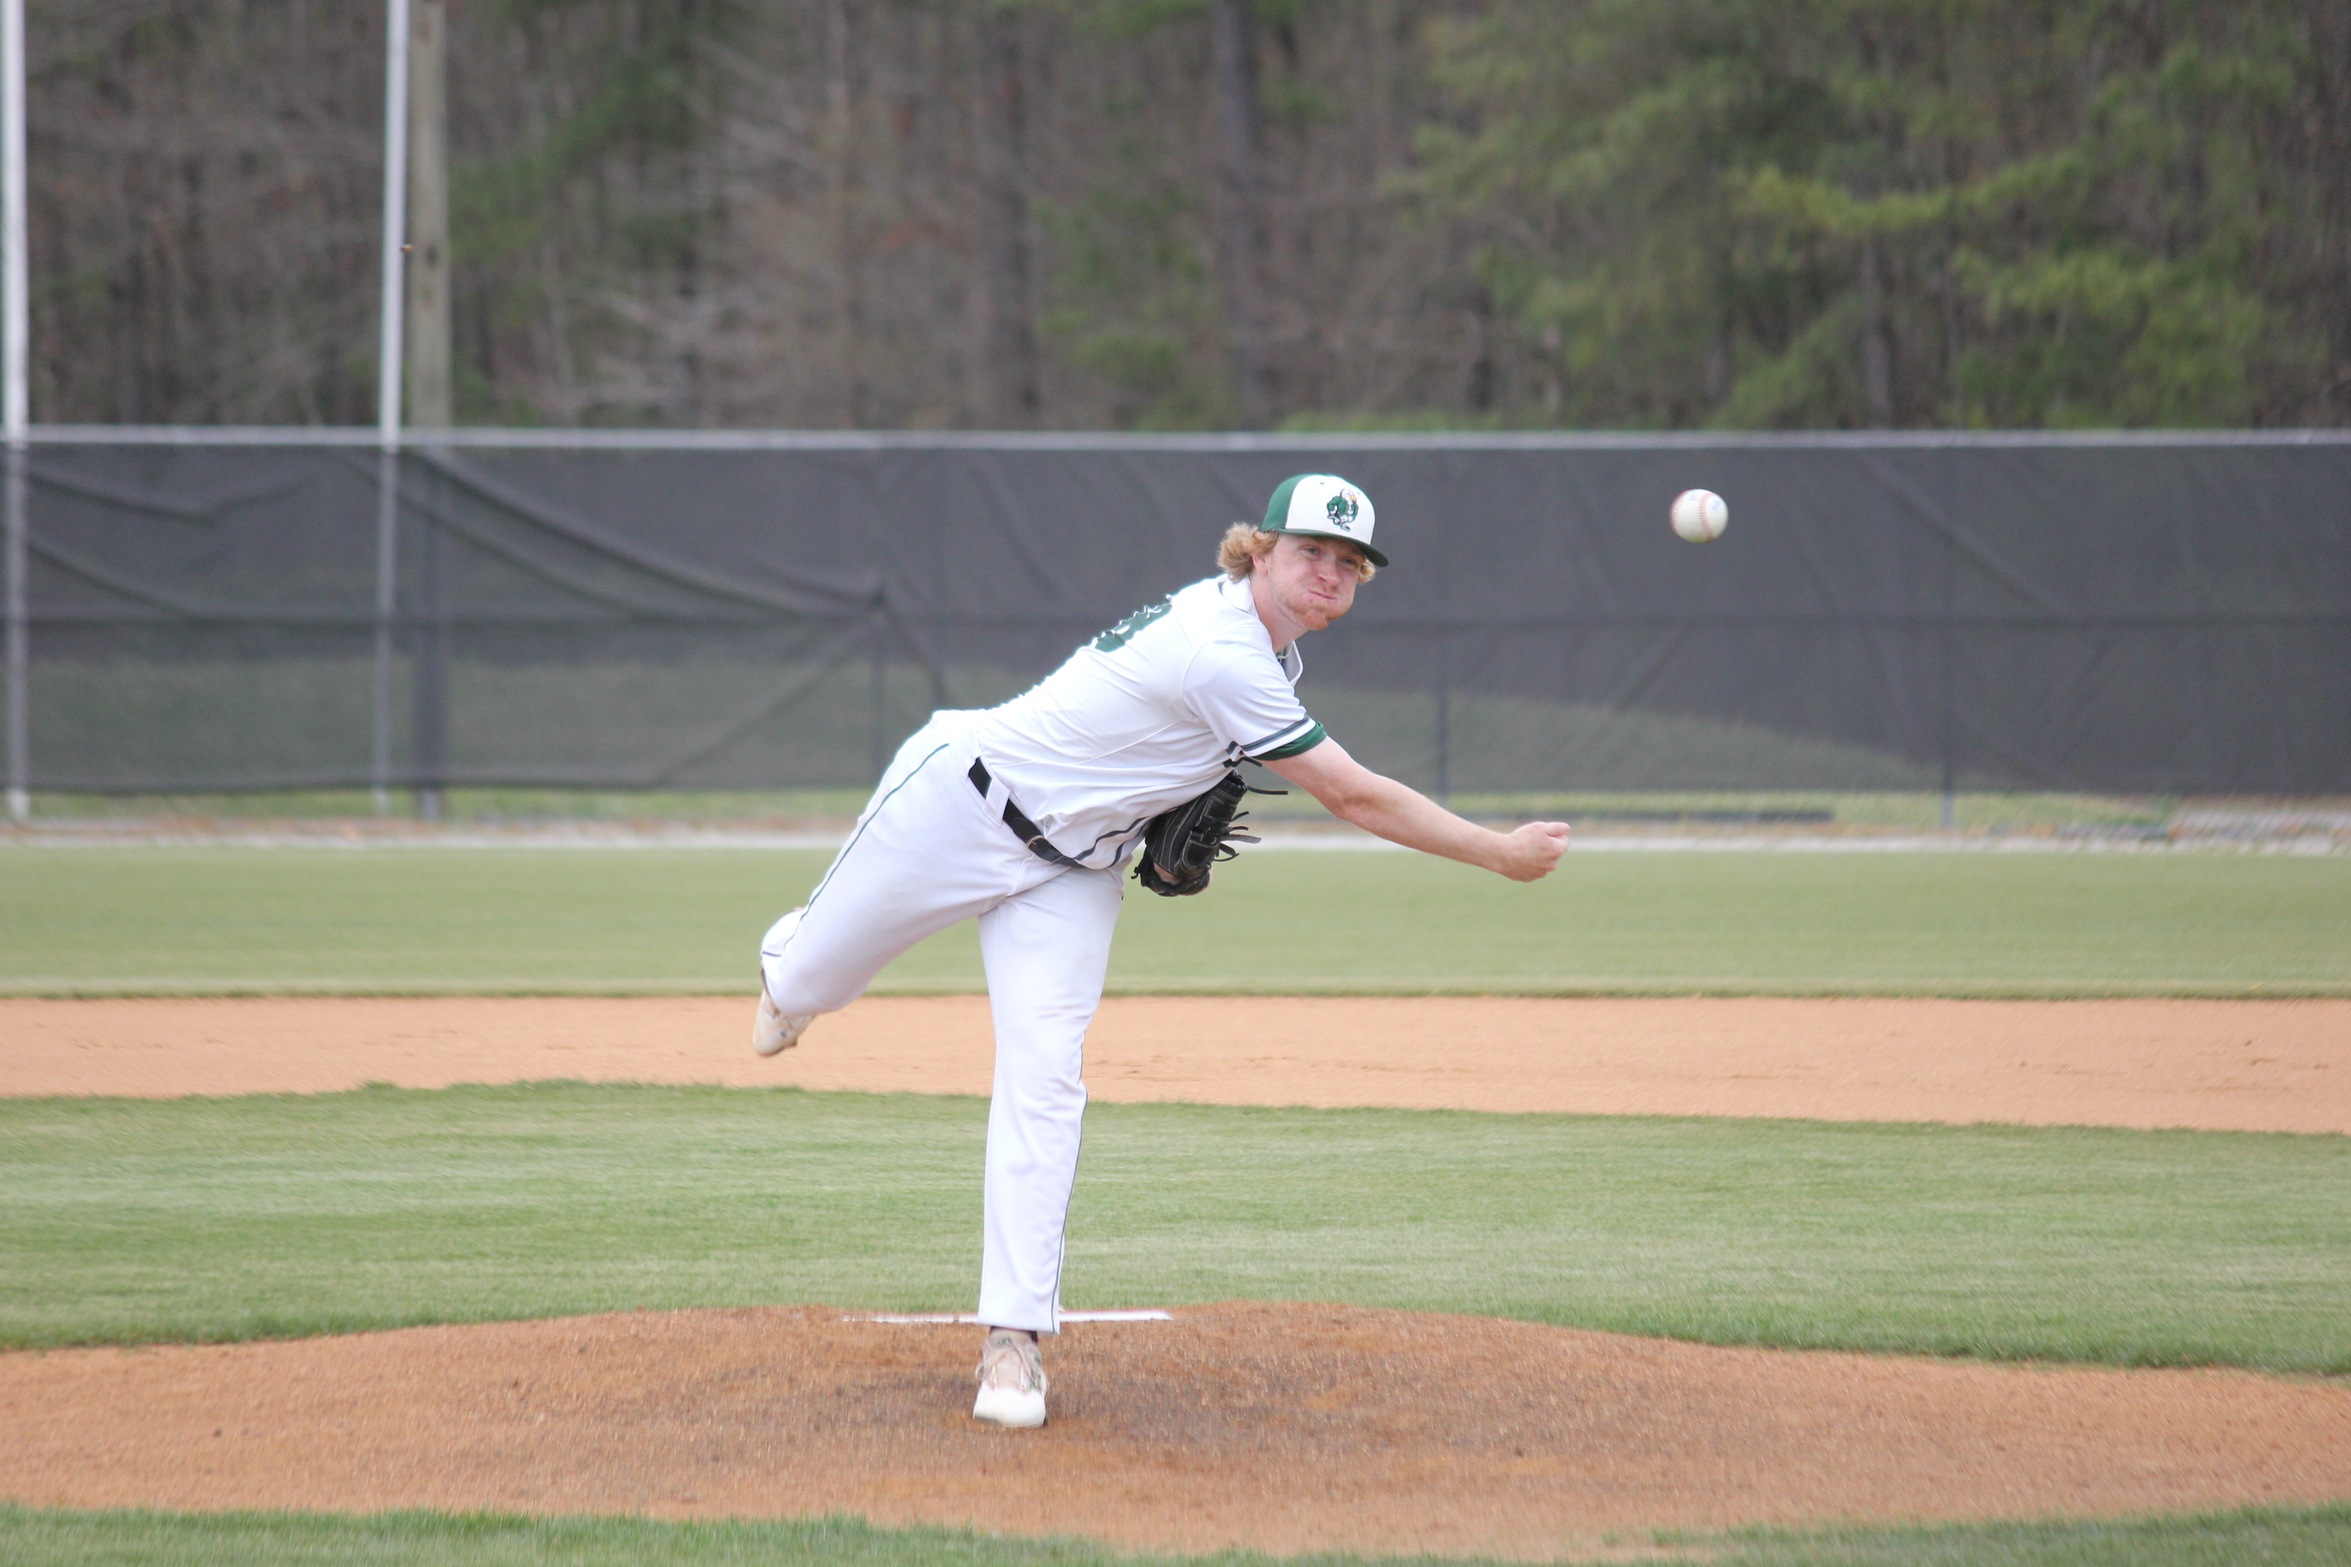 Statesmen Fall to Bobcats After Surrendering Big Third Inning